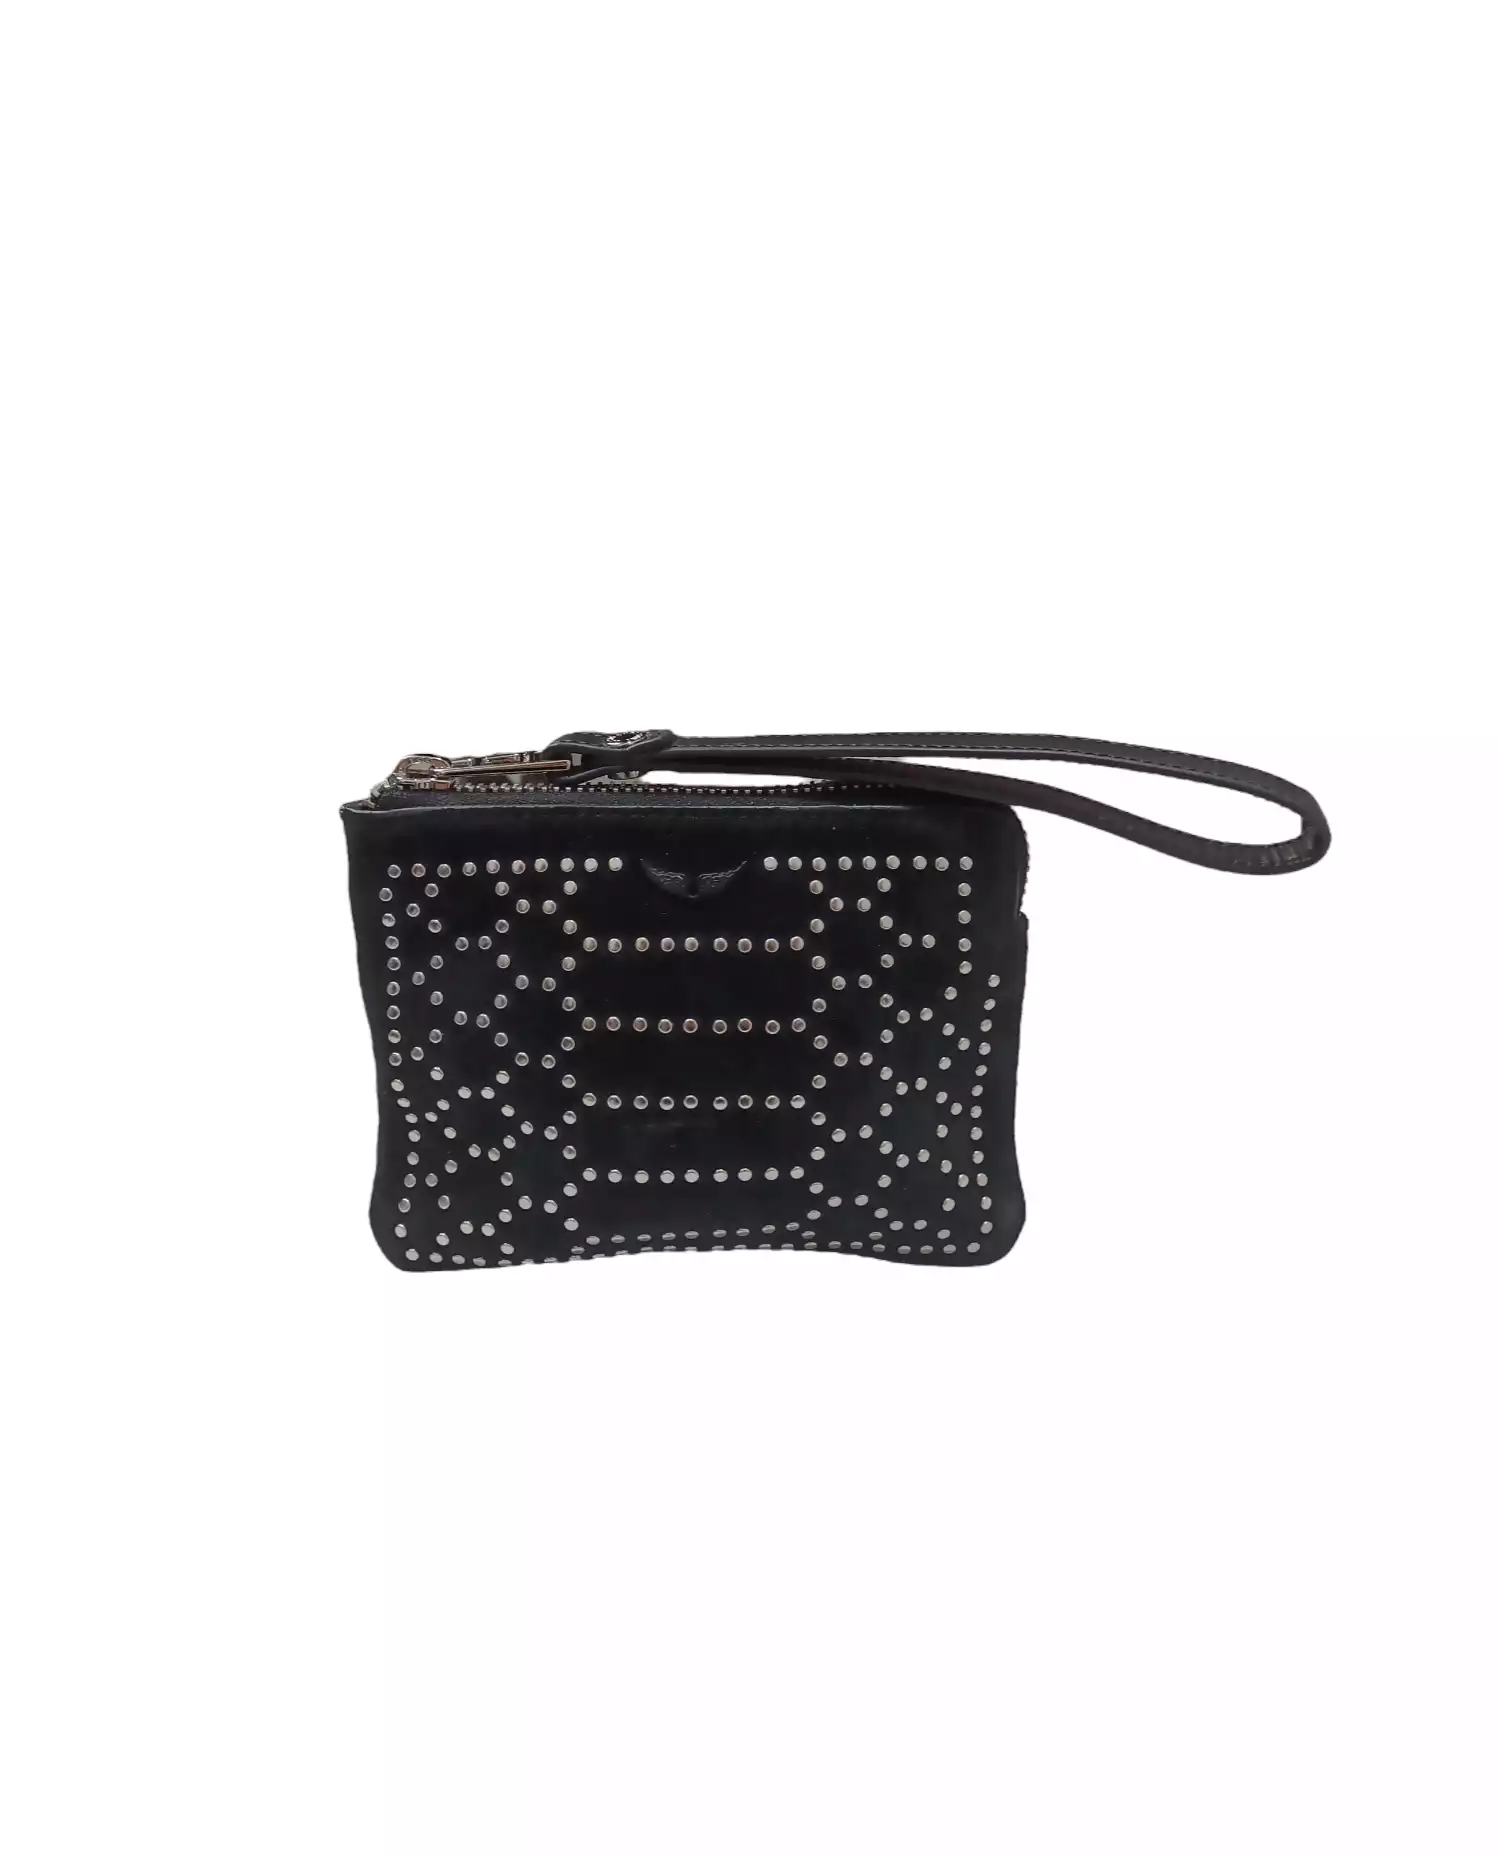 Wallet by Zadig & Voltaire